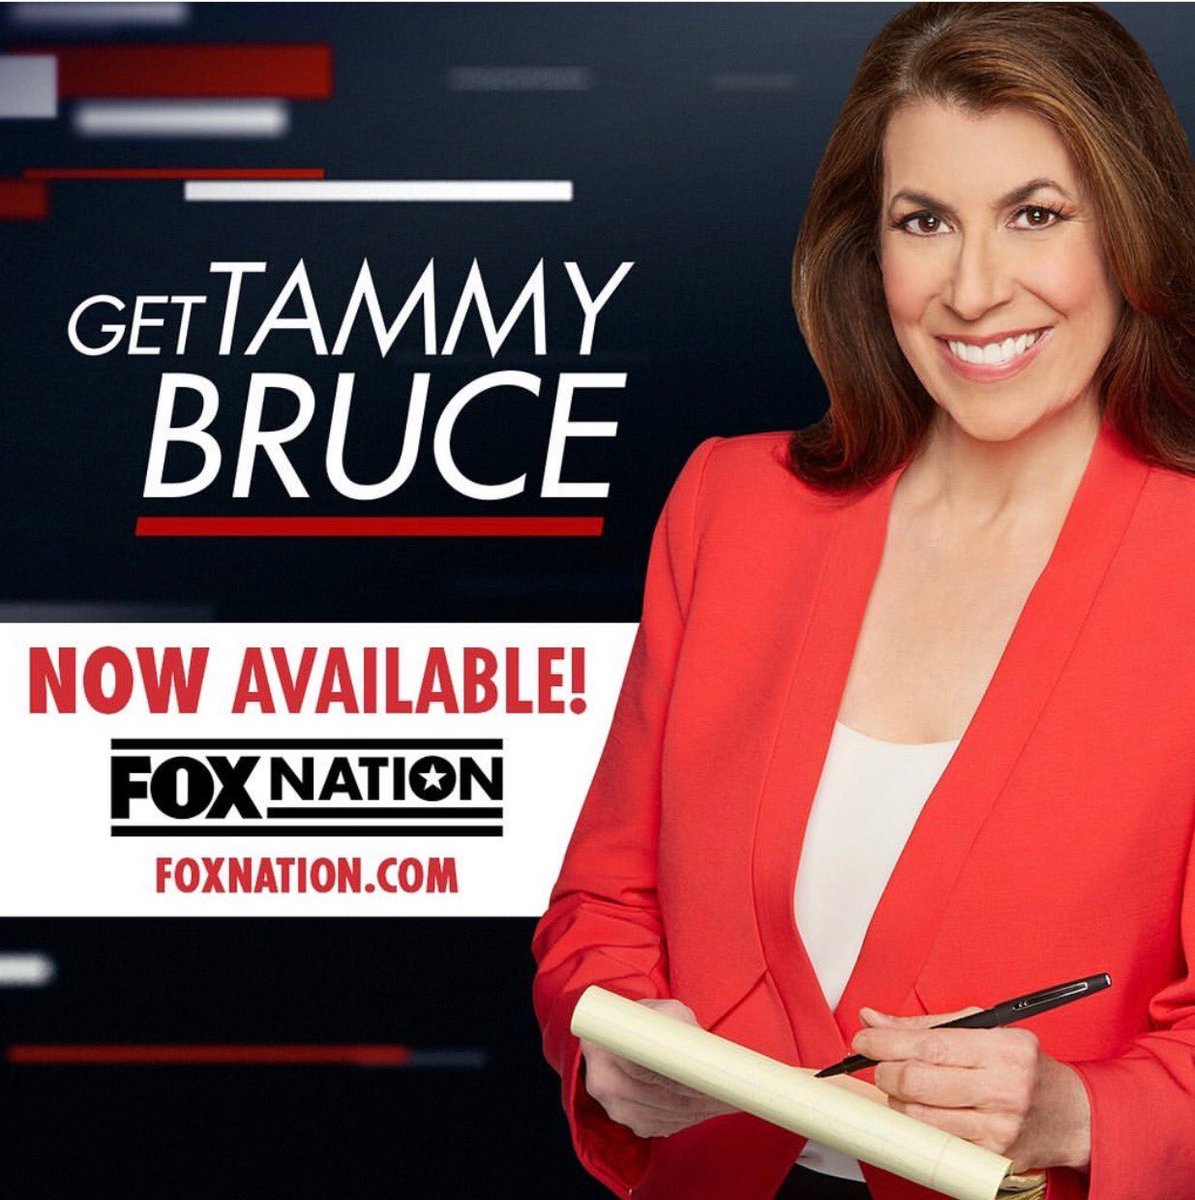 Foxnation 'S / Tammy Bruce / News / Leave.